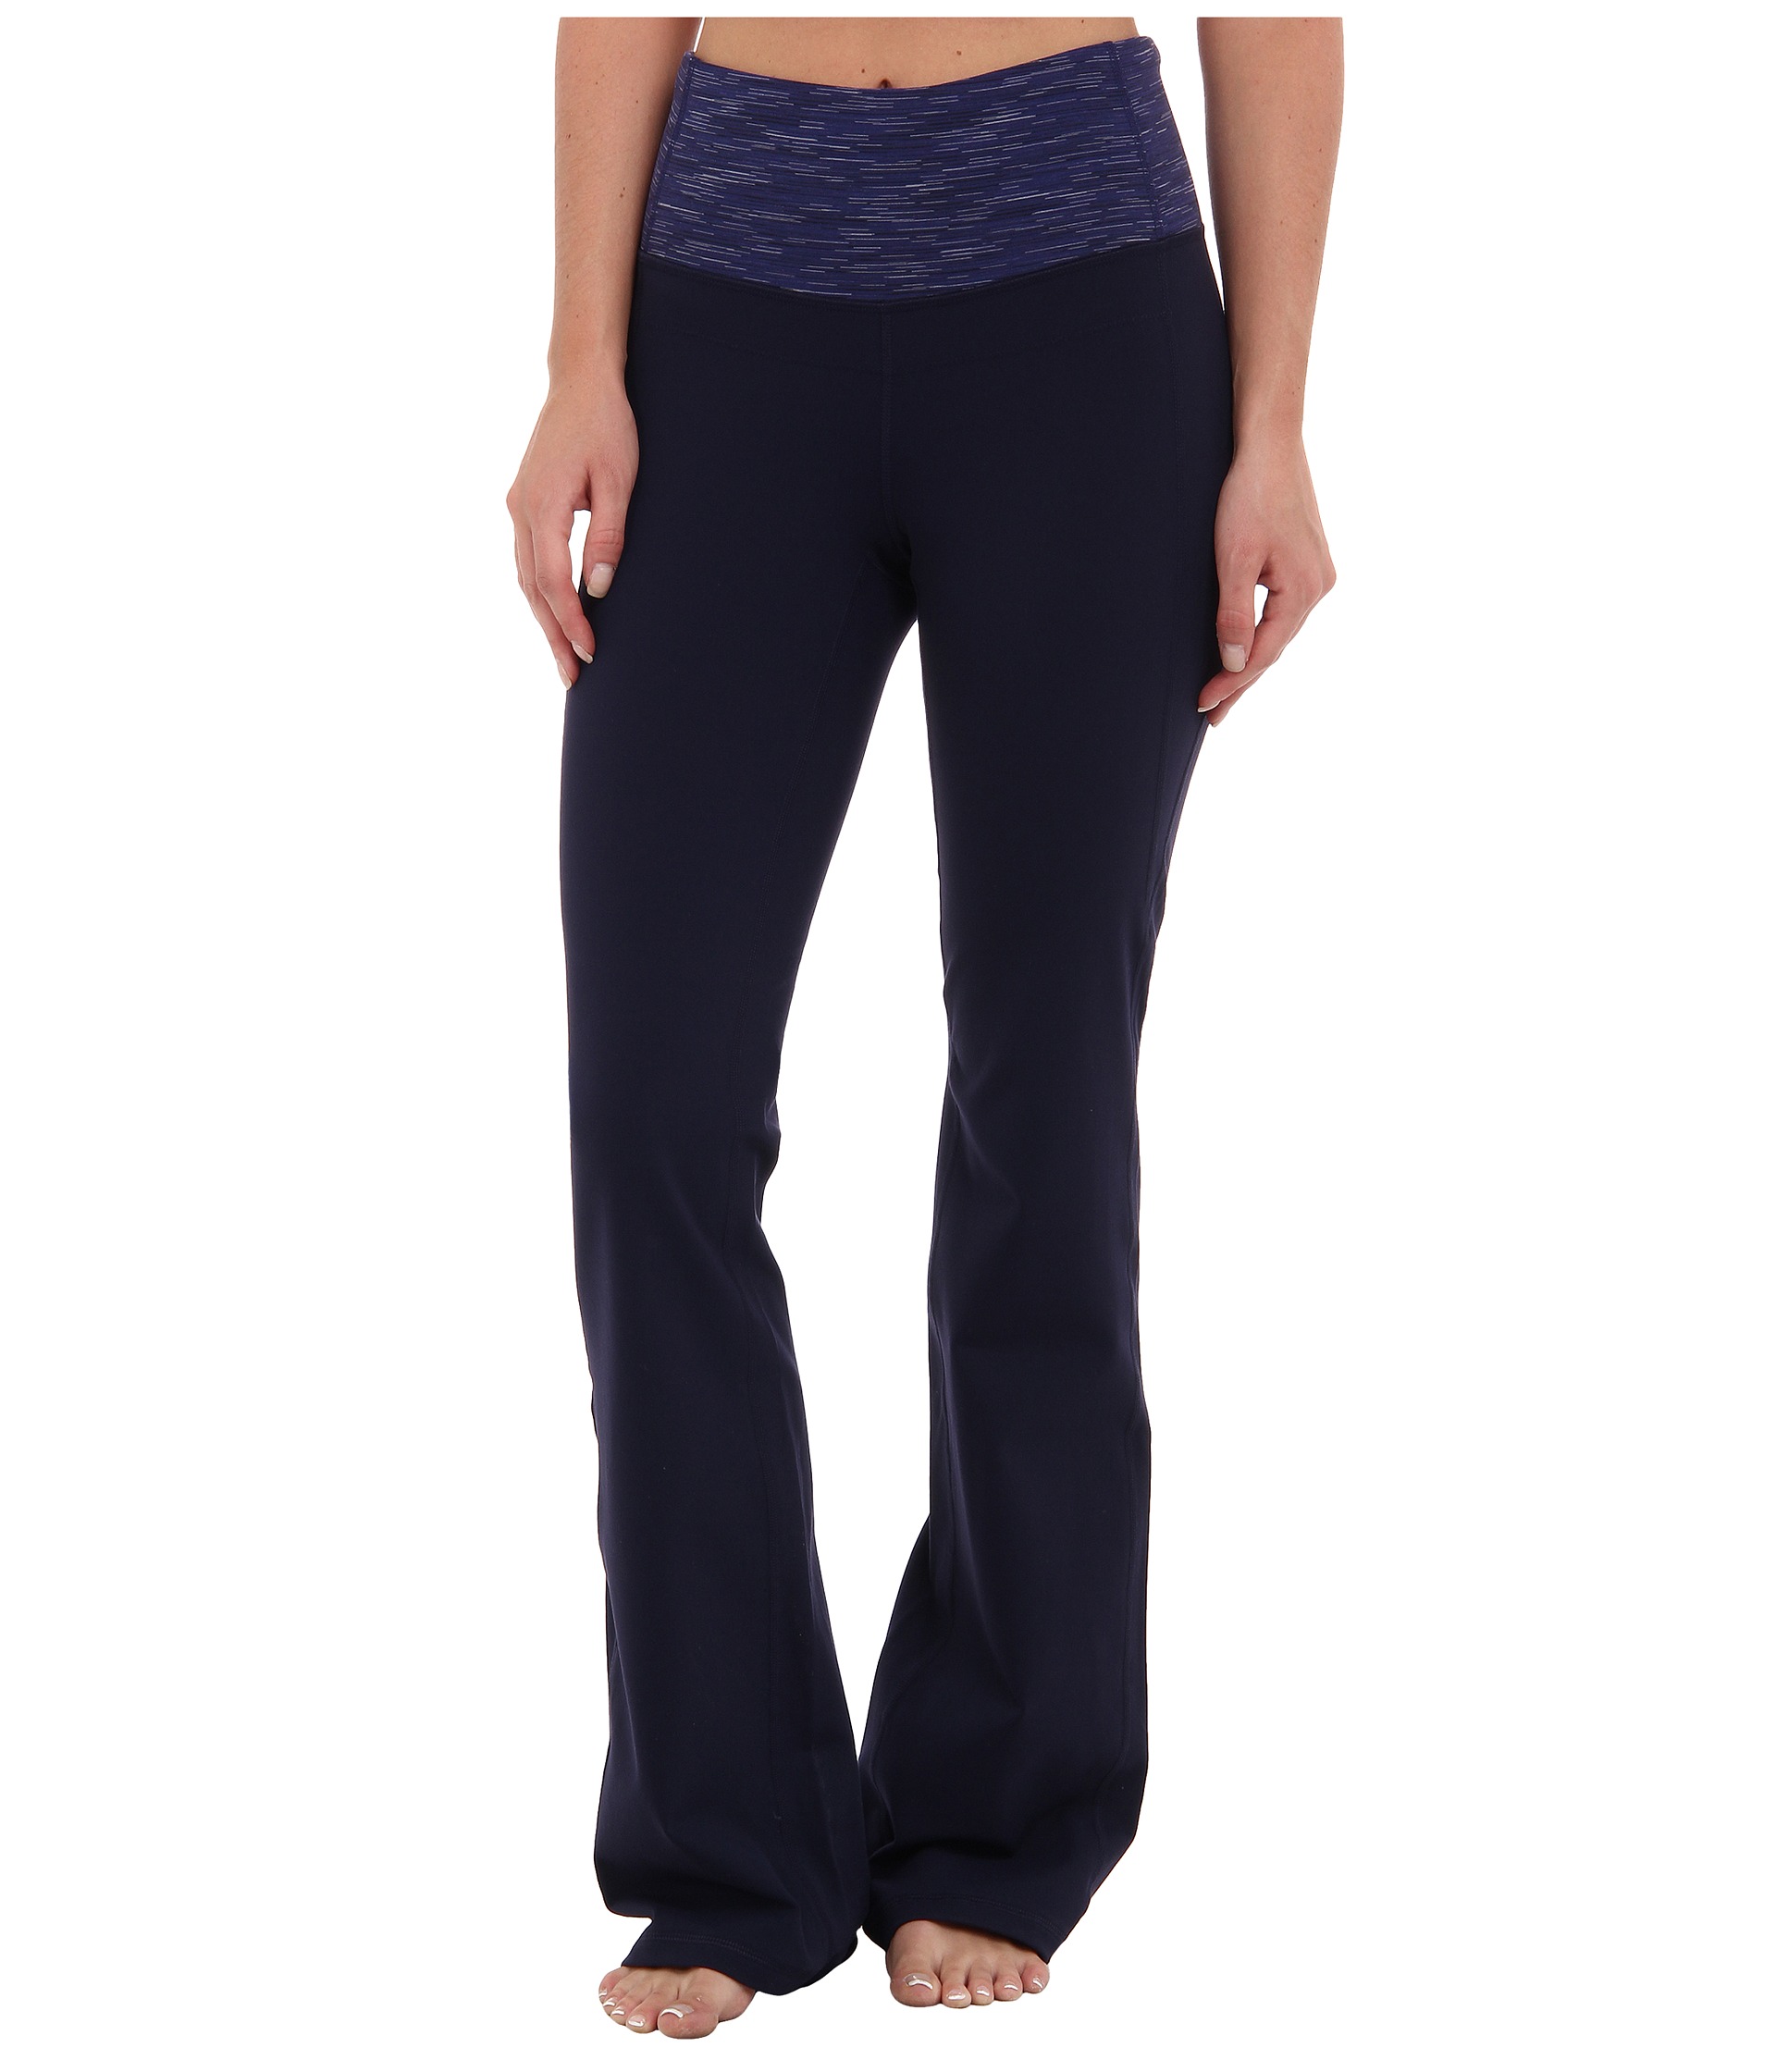 Lucy Perfect Core Pant Lucy Navy/Ultramarine Stripe 2 - Zappos.com Free ...